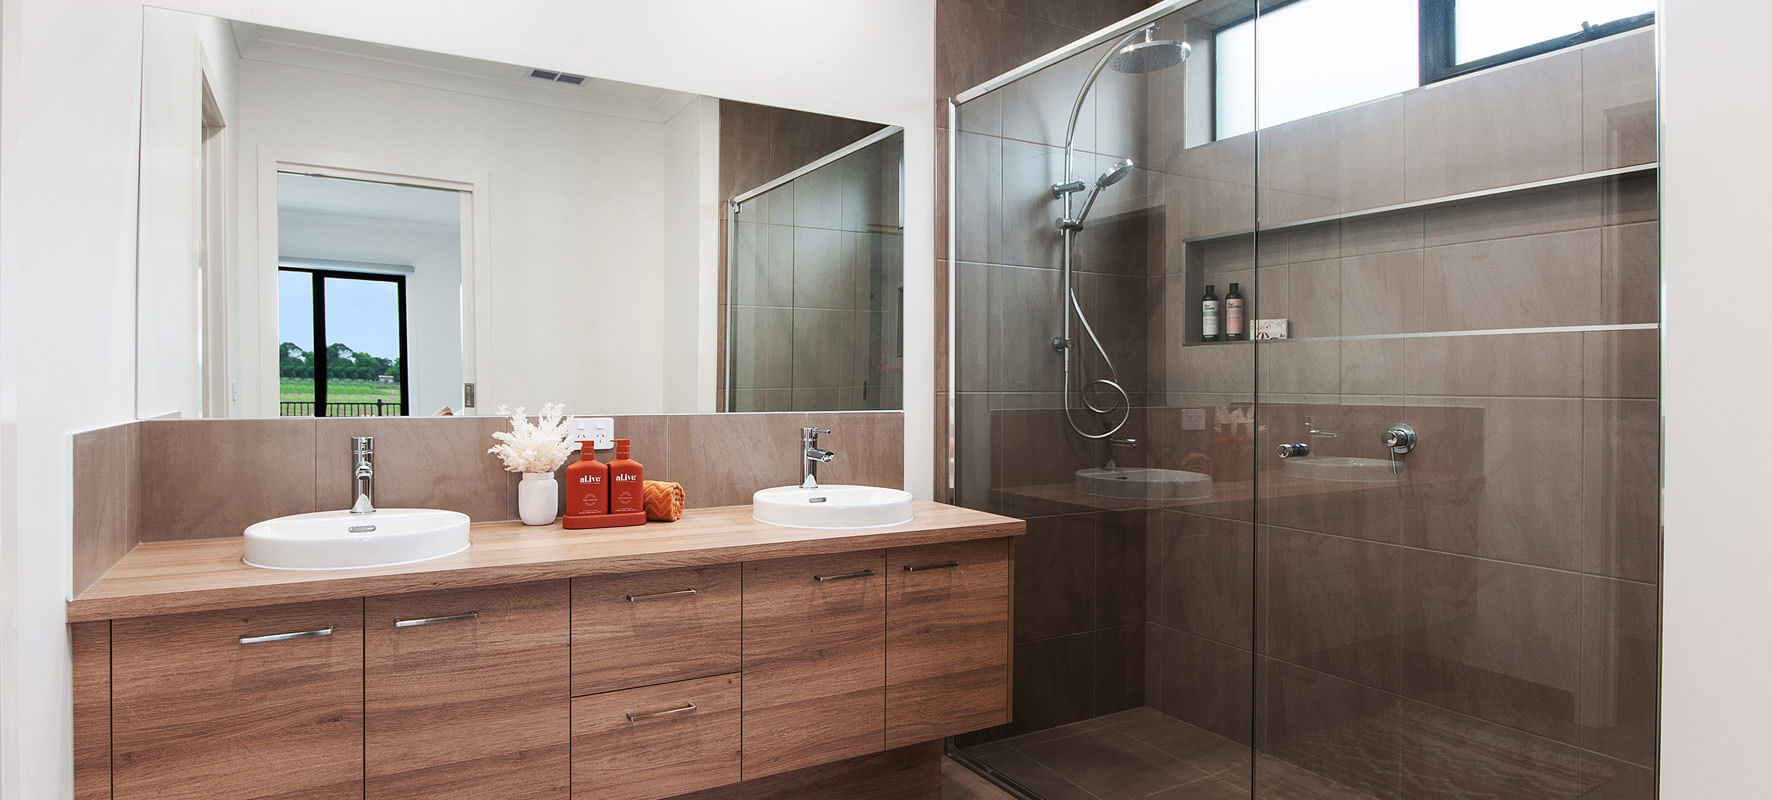 Photo of modern bathroom showing timber vanity with two white sinks, and clear glass shower screen with grey tiled shower